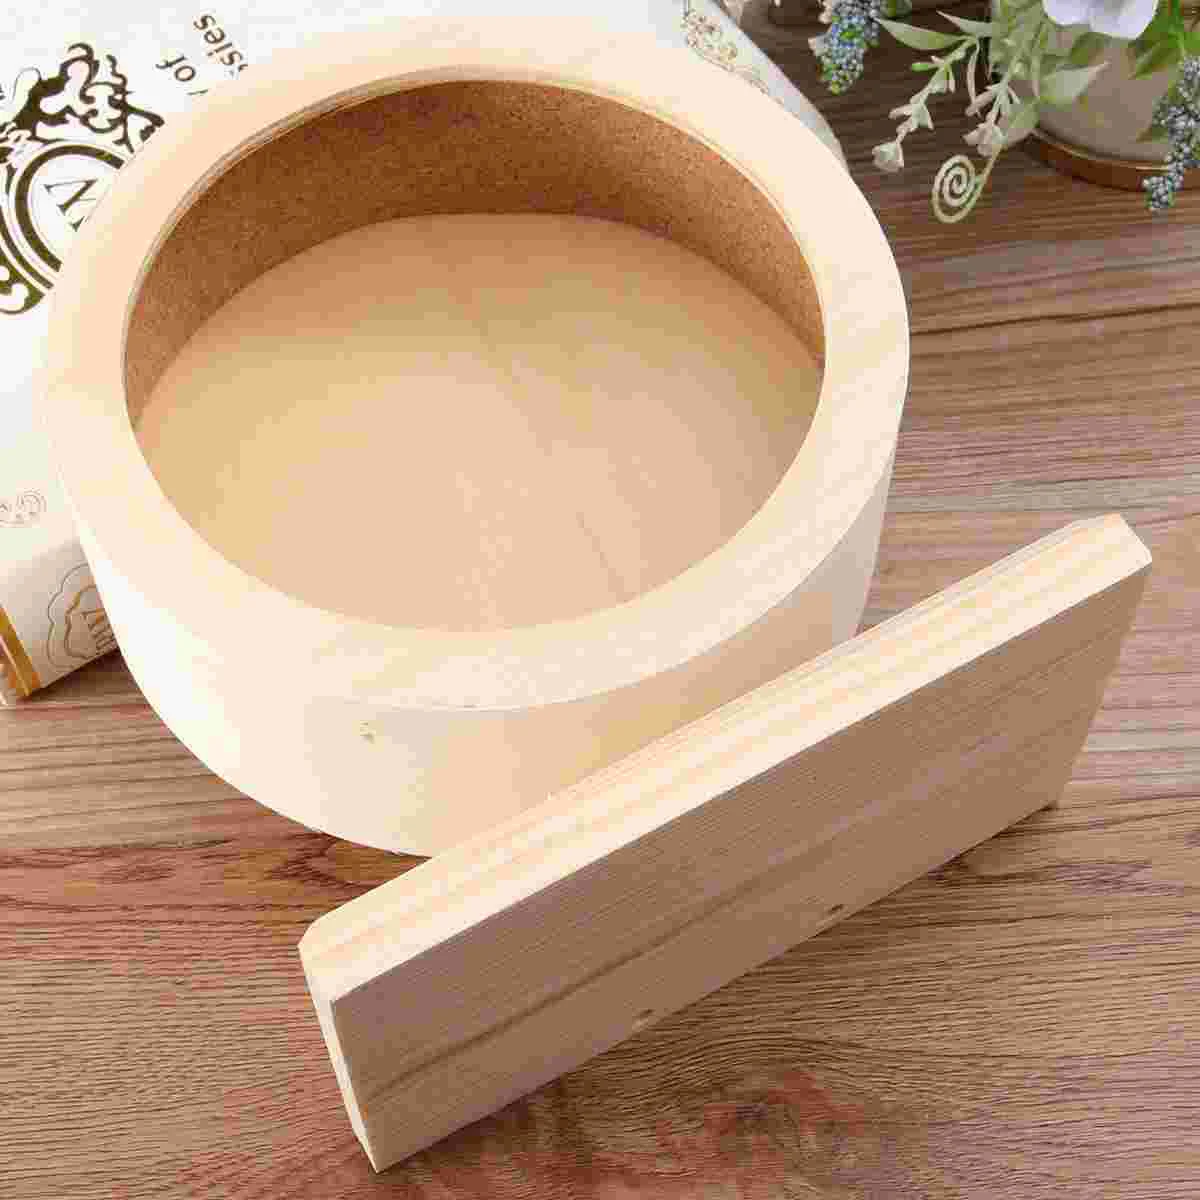 

Small Pets Exercise Wheel Hamster Wooden Mute Running Wheel Play Rest Nest for Rat Gerbil Mice Chinchillas Hedgehogs Guinea Pigs